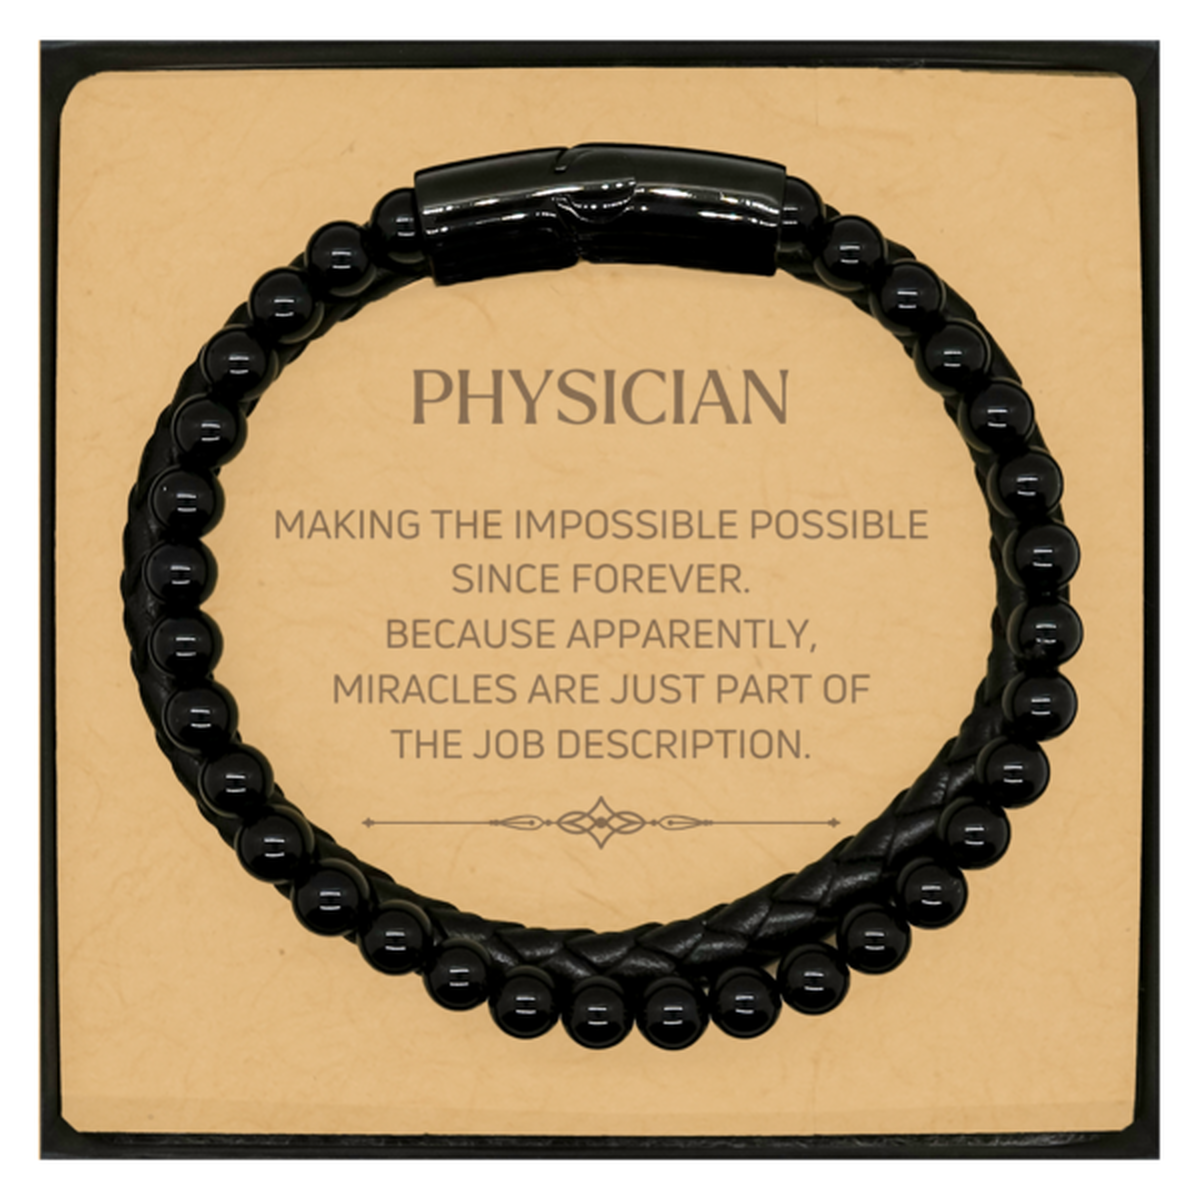 Funny Physician Gifts, Miracles are just part of the job description, Inspirational Birthday Christmas Stone Leather Bracelets For Physician, Men, Women, Coworkers, Friends, Boss